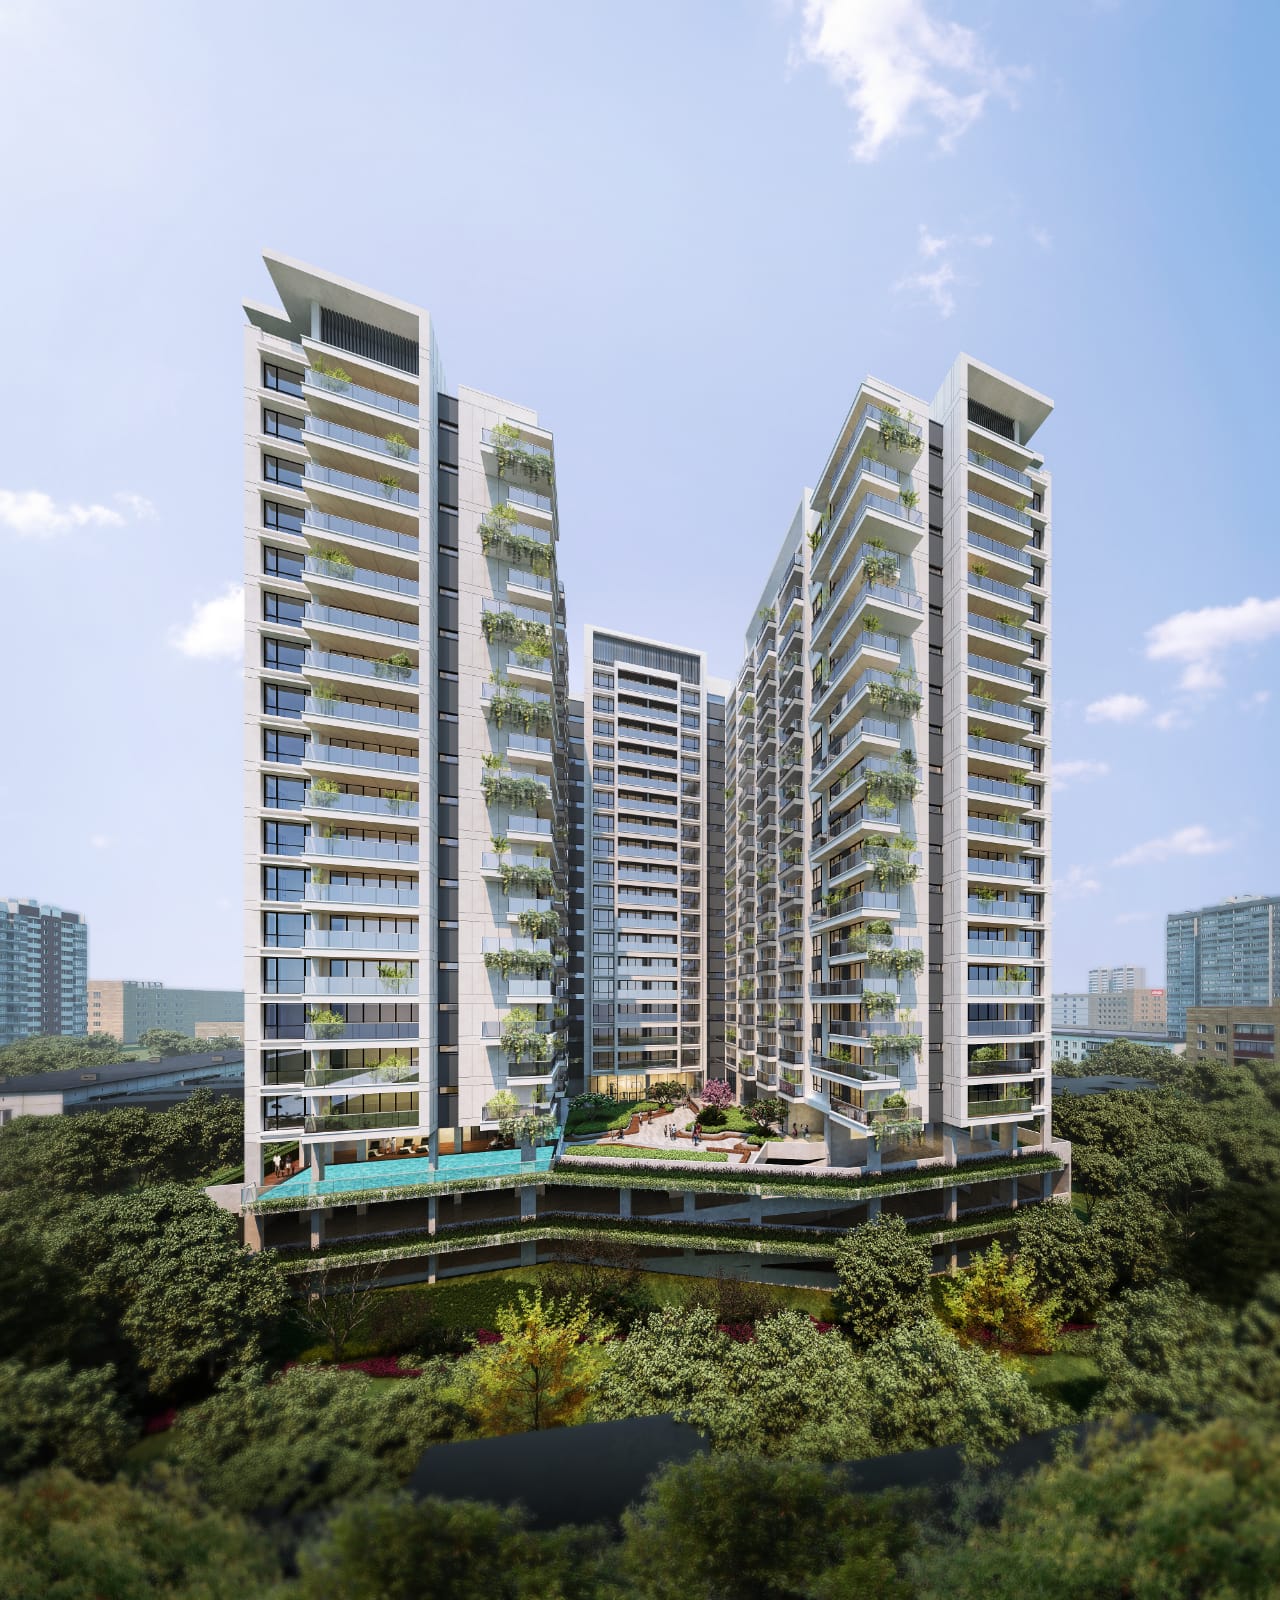 Capital Garden Apartments Kilimani For Sale. 1, 2 and 3 Bedrooms From Ksh. 6.8m